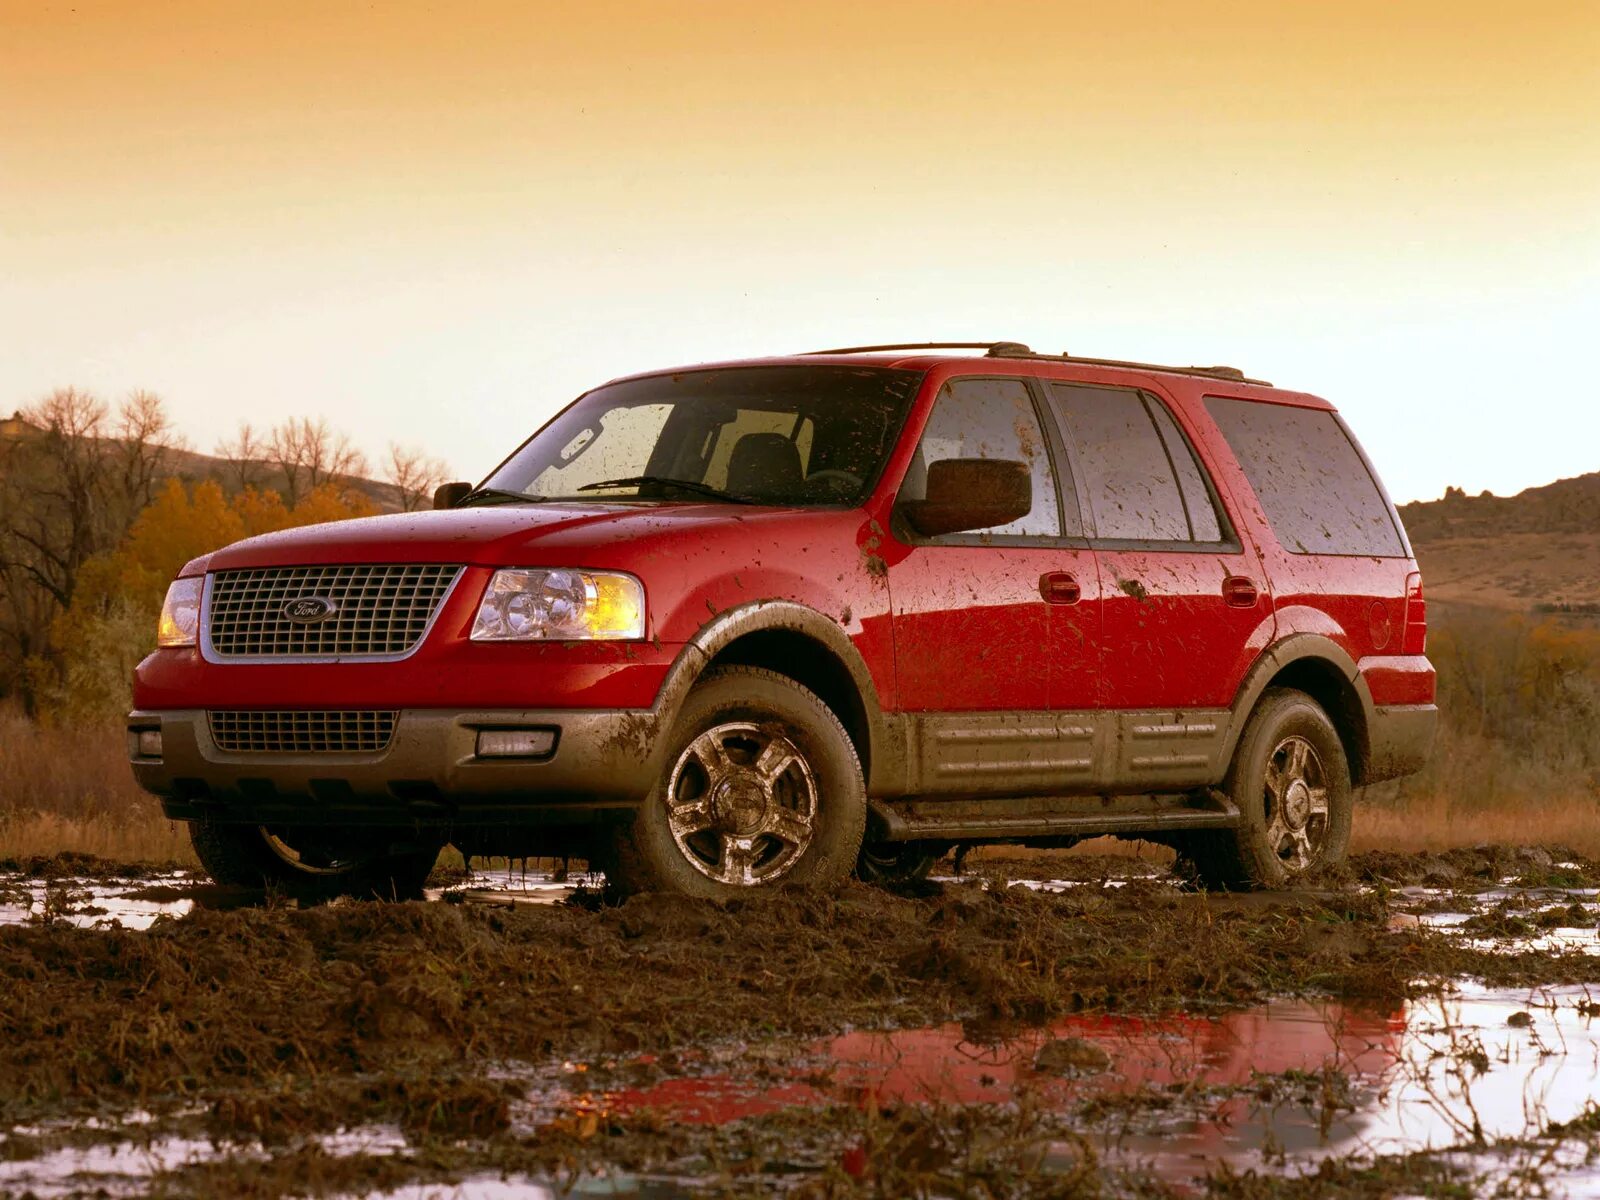 Ford Expedition 2. Форд Экспедишн 2003. Ford Expedition 2002. Форд Экспедишн 2006.